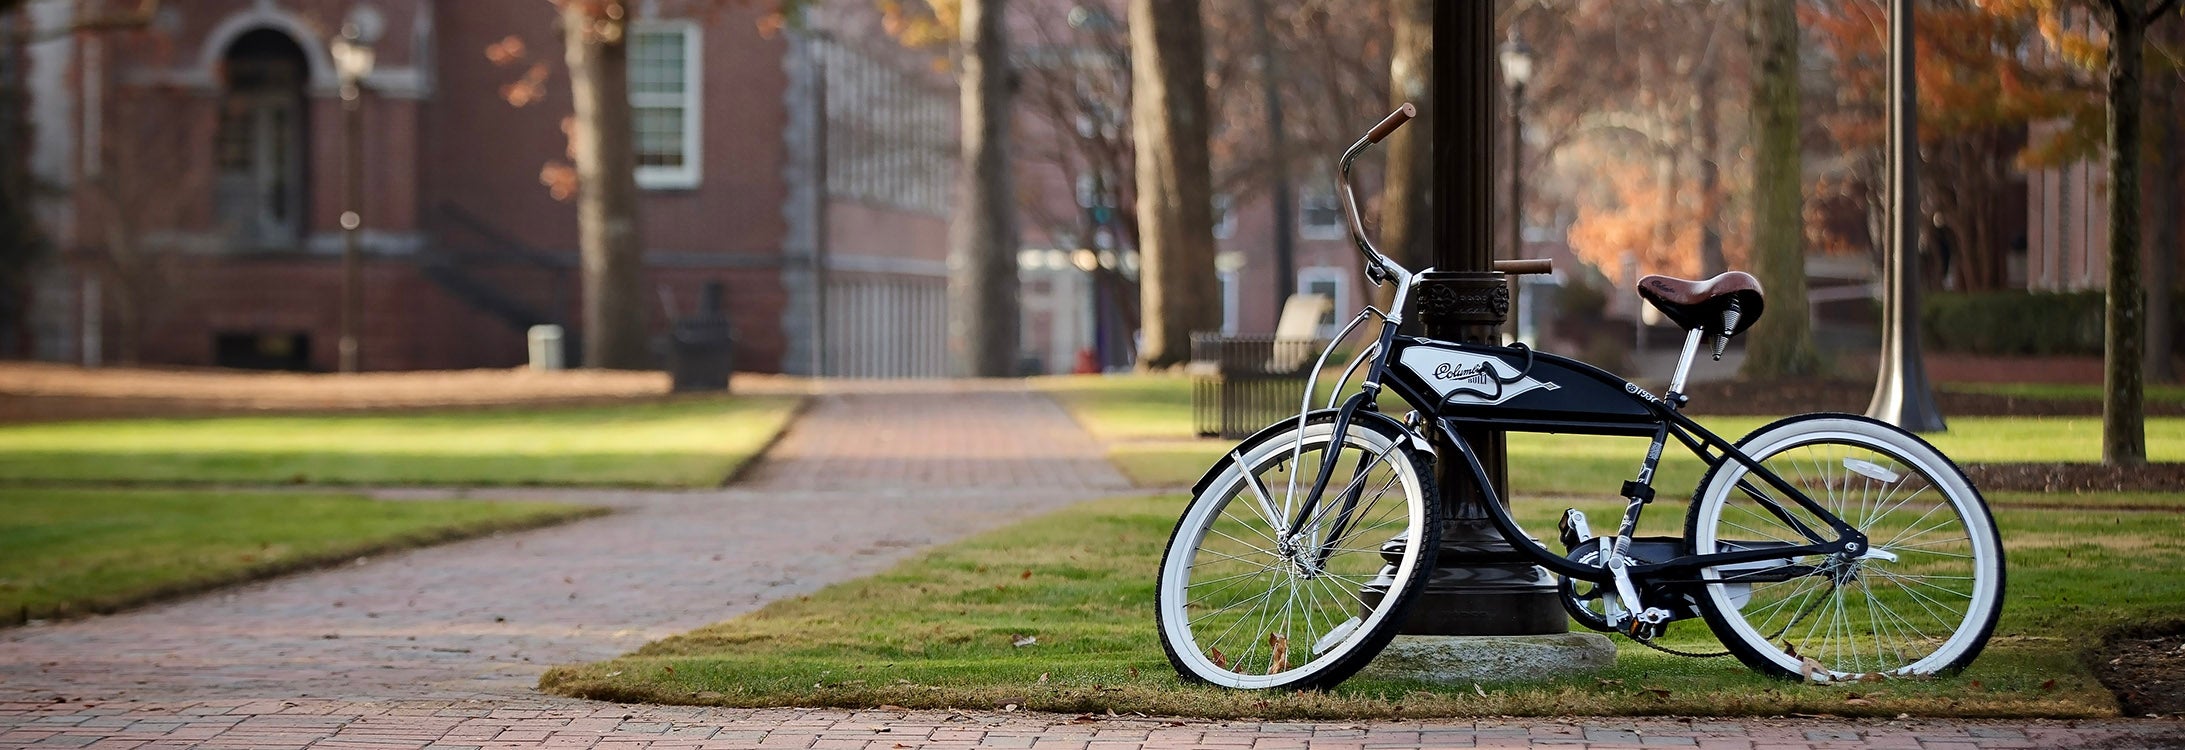 Bike sits parked on campus.